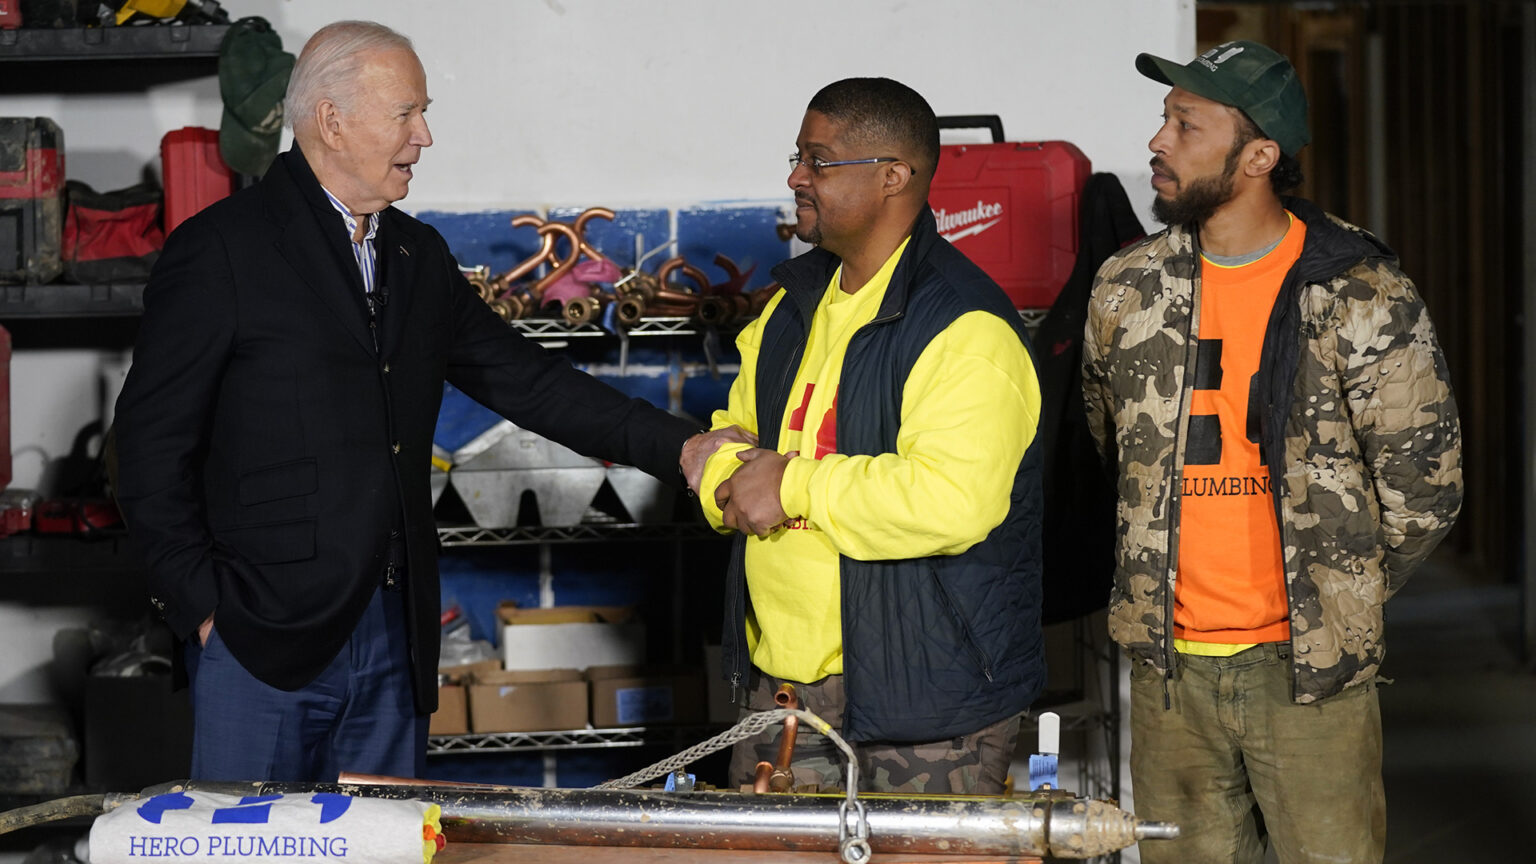 Joe Biden holds the wrist of a man facing him with his hands clasped, and with another man to the side standing with arms behind his back, in a room with plumbing equipment on a table and on shelves along the rear wall.